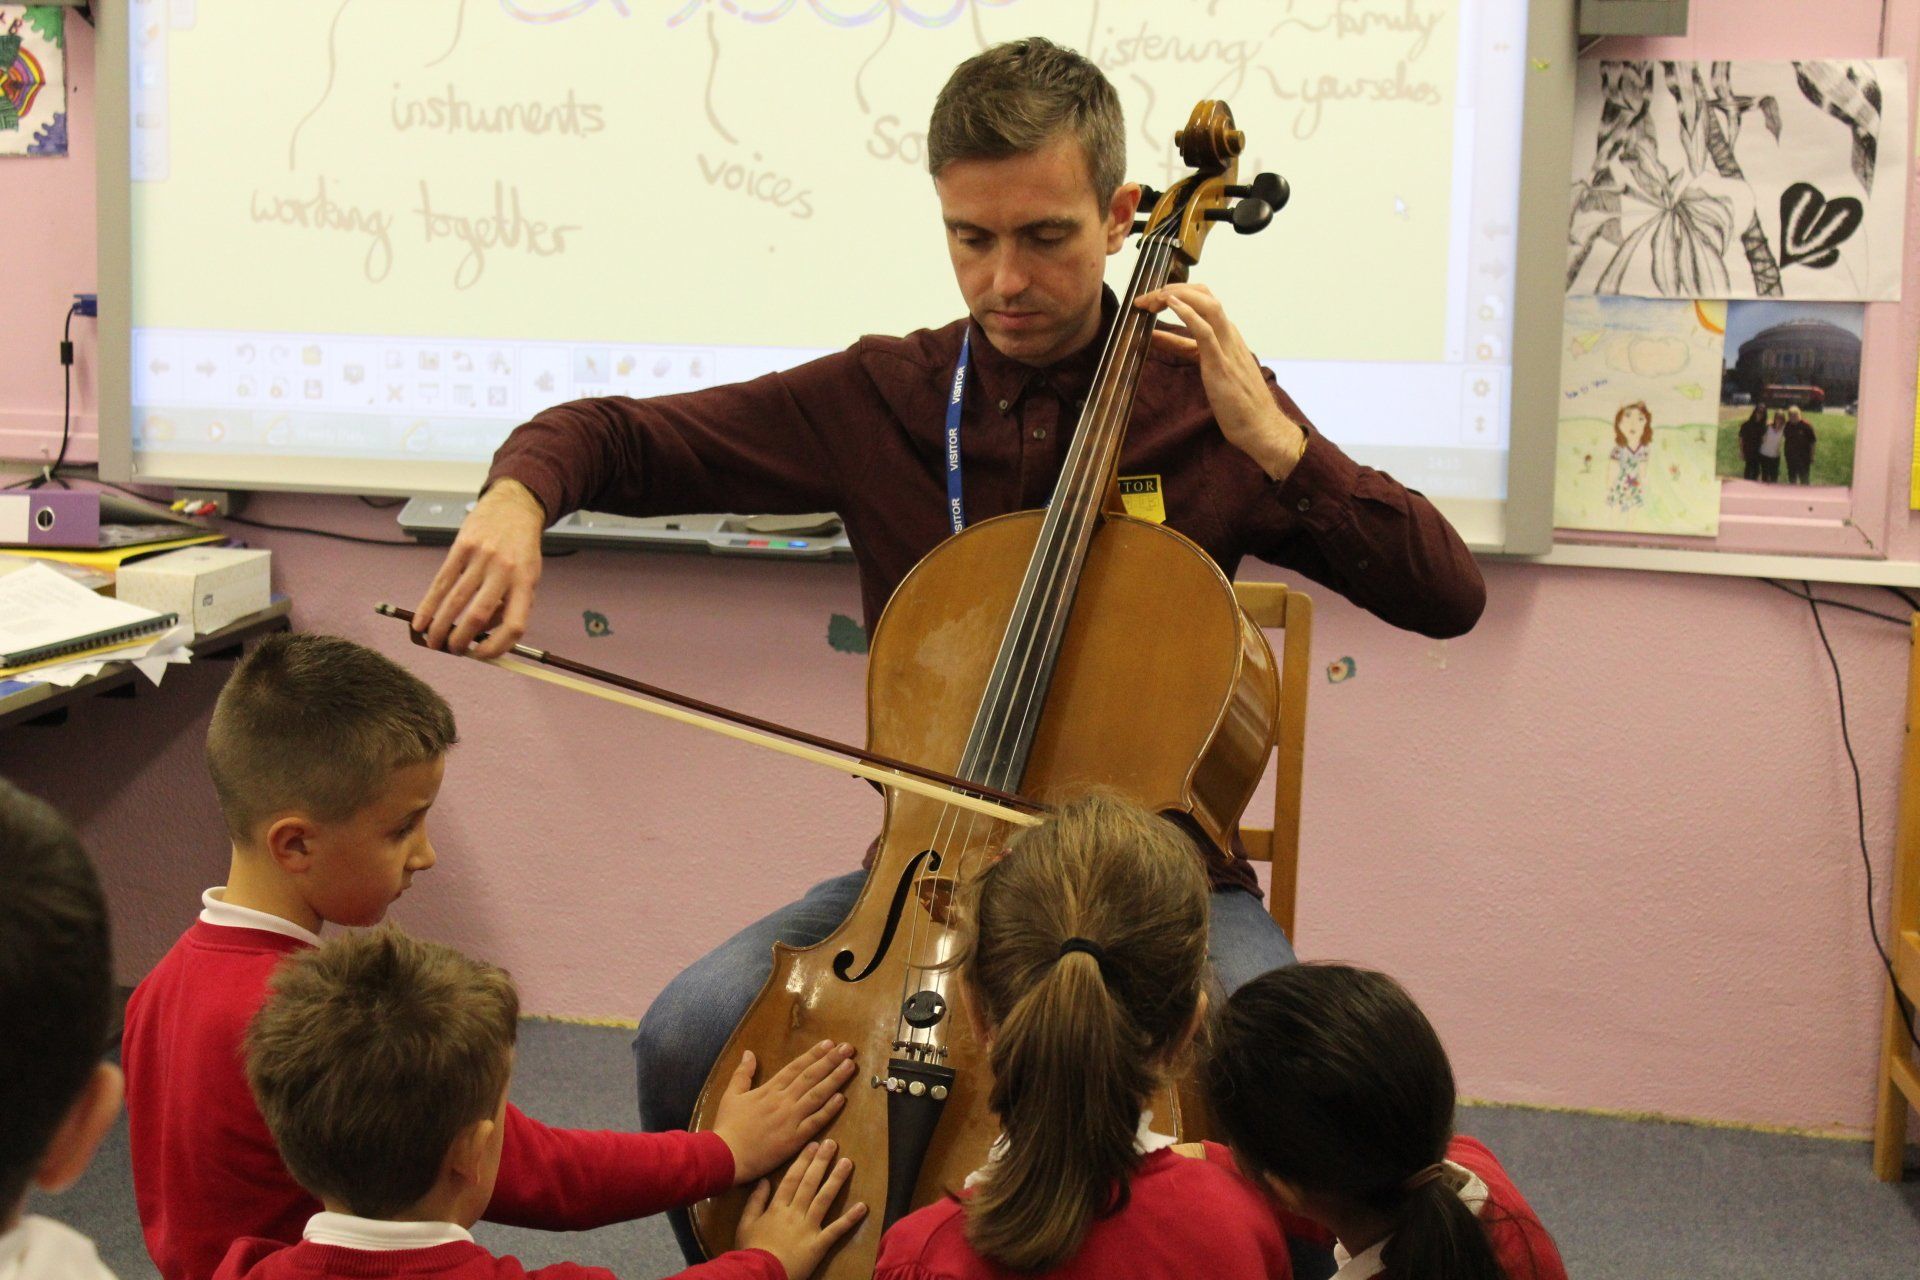 a man is playing a cello in front of a group of children in a classroom .